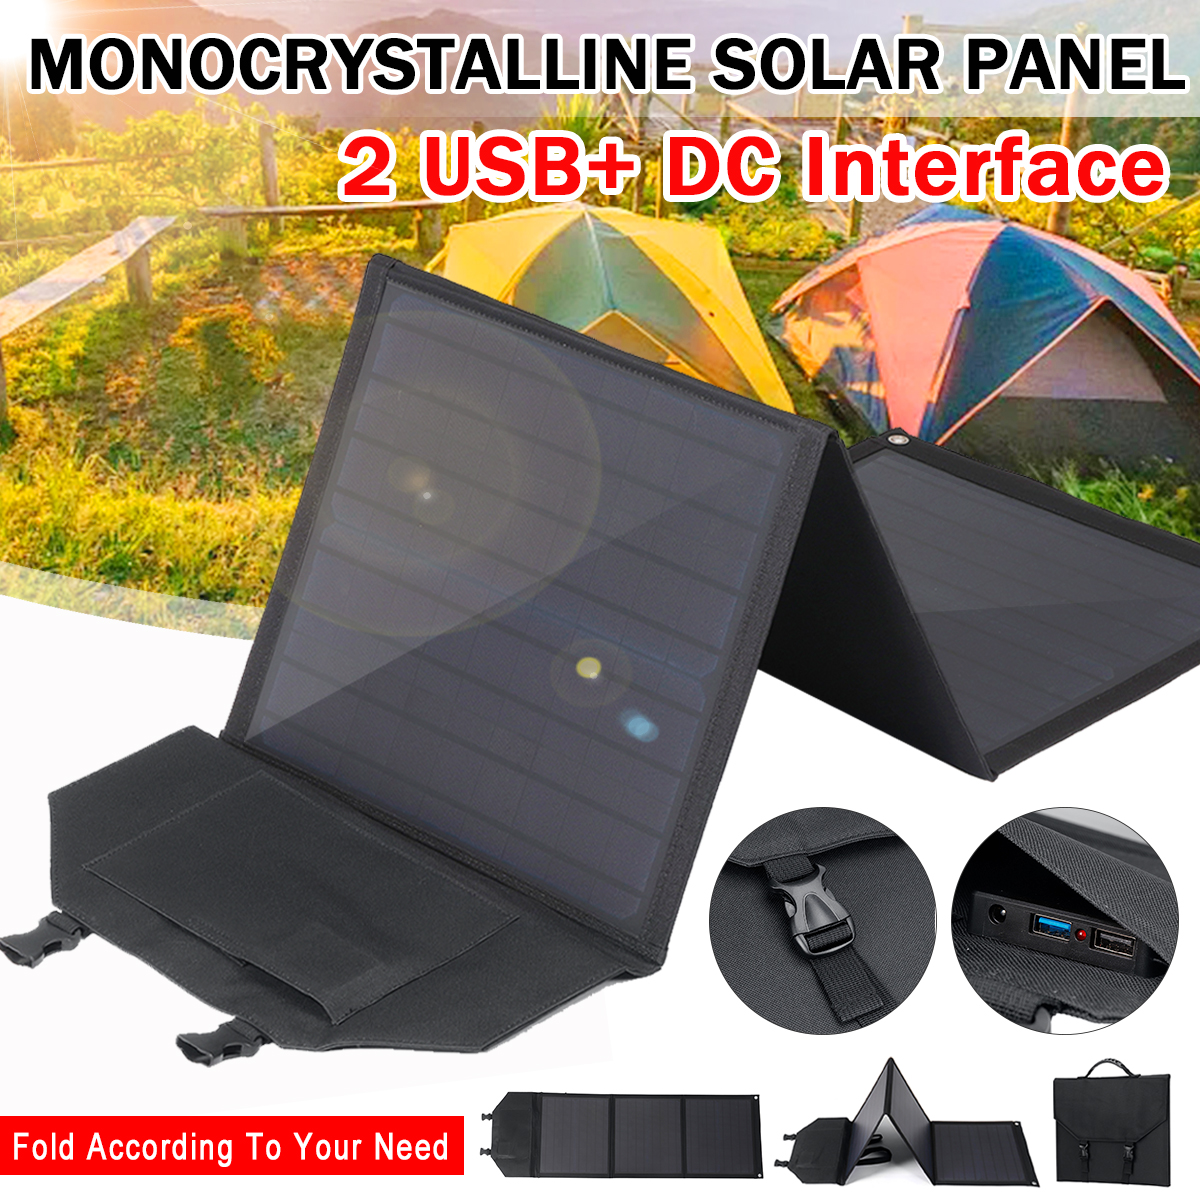 60W-USB-Solar-Panel-Folding-Monocrystalline-PET-Power-Charger--for-Phone-RV-Car-MP3-PAD-Charger-Outd-1905385-1